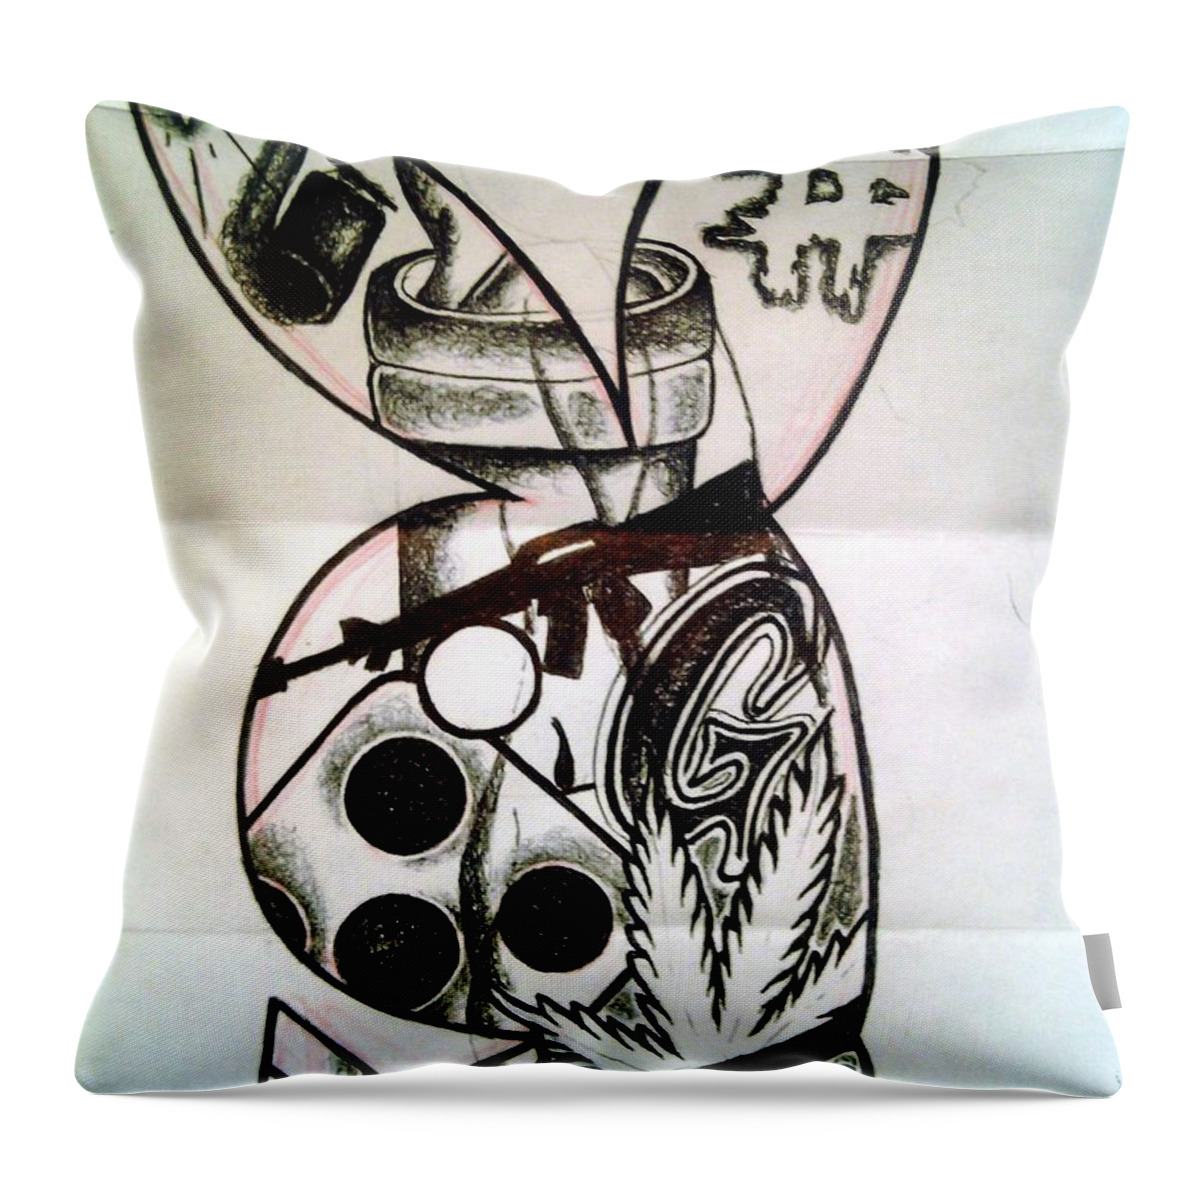 Black Art Throw Pillow featuring the drawing Untitled 15 by A S 